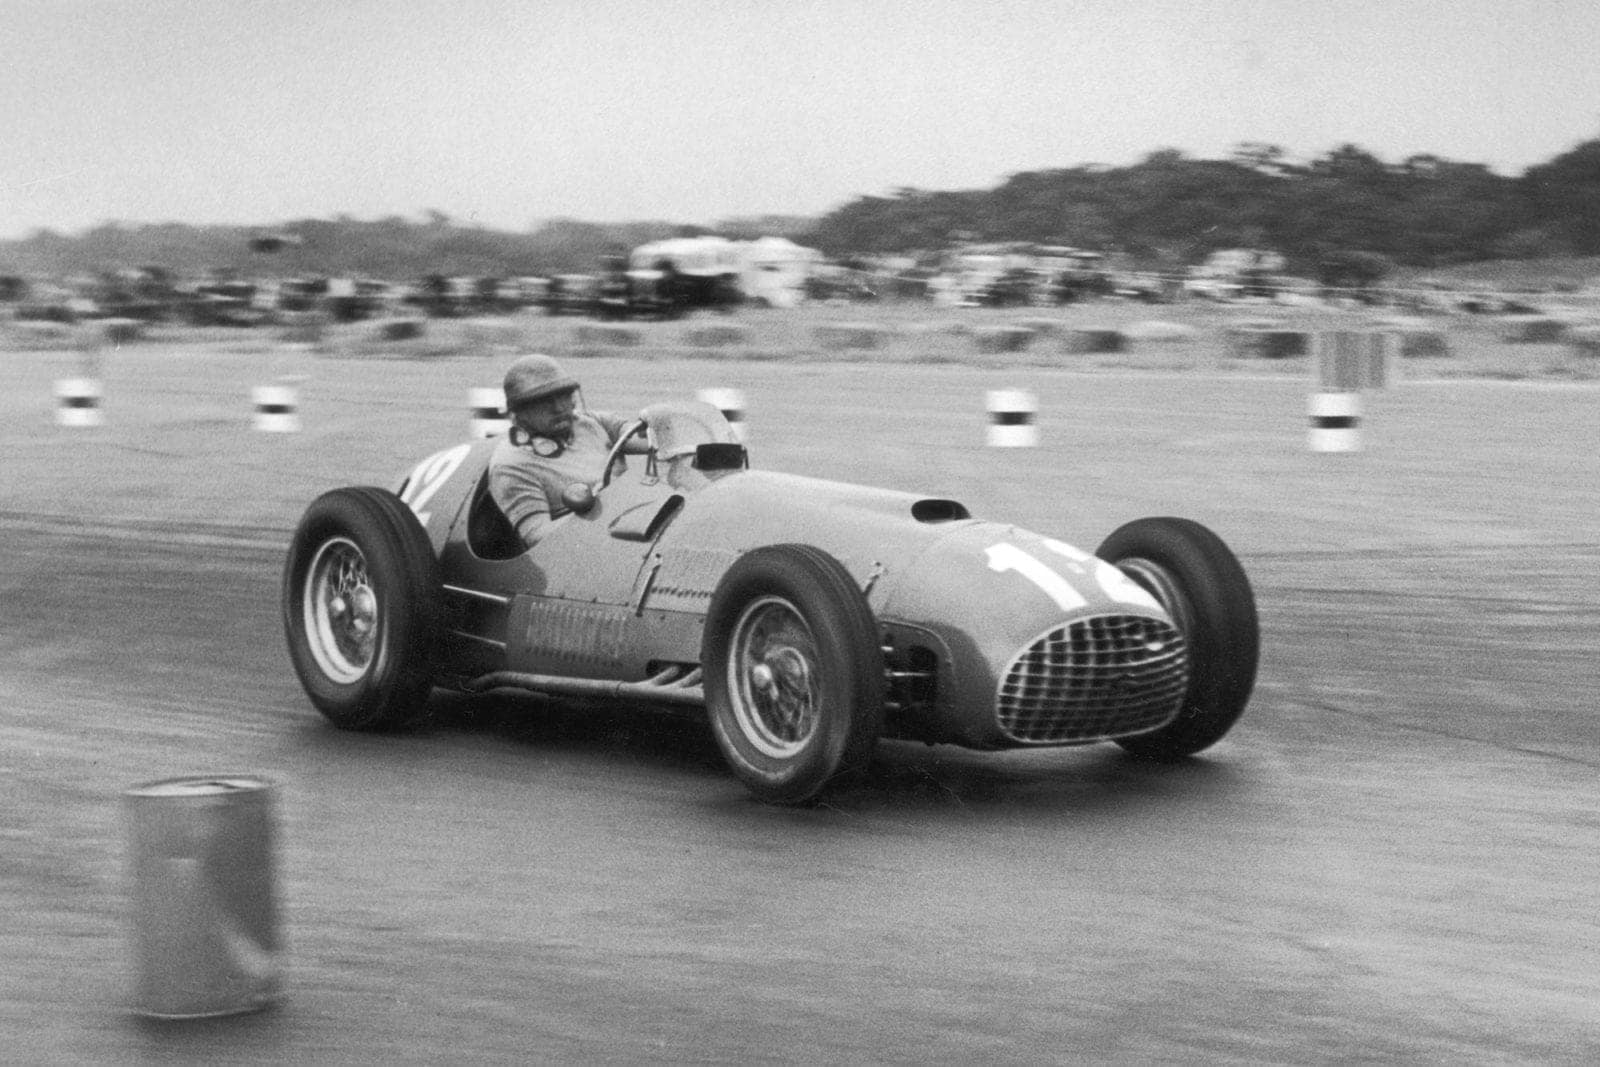 28th July 1951: Froilan Gonzalez in his Ferrari 375 on his way to victory in the British Grand Prix at Silverstone